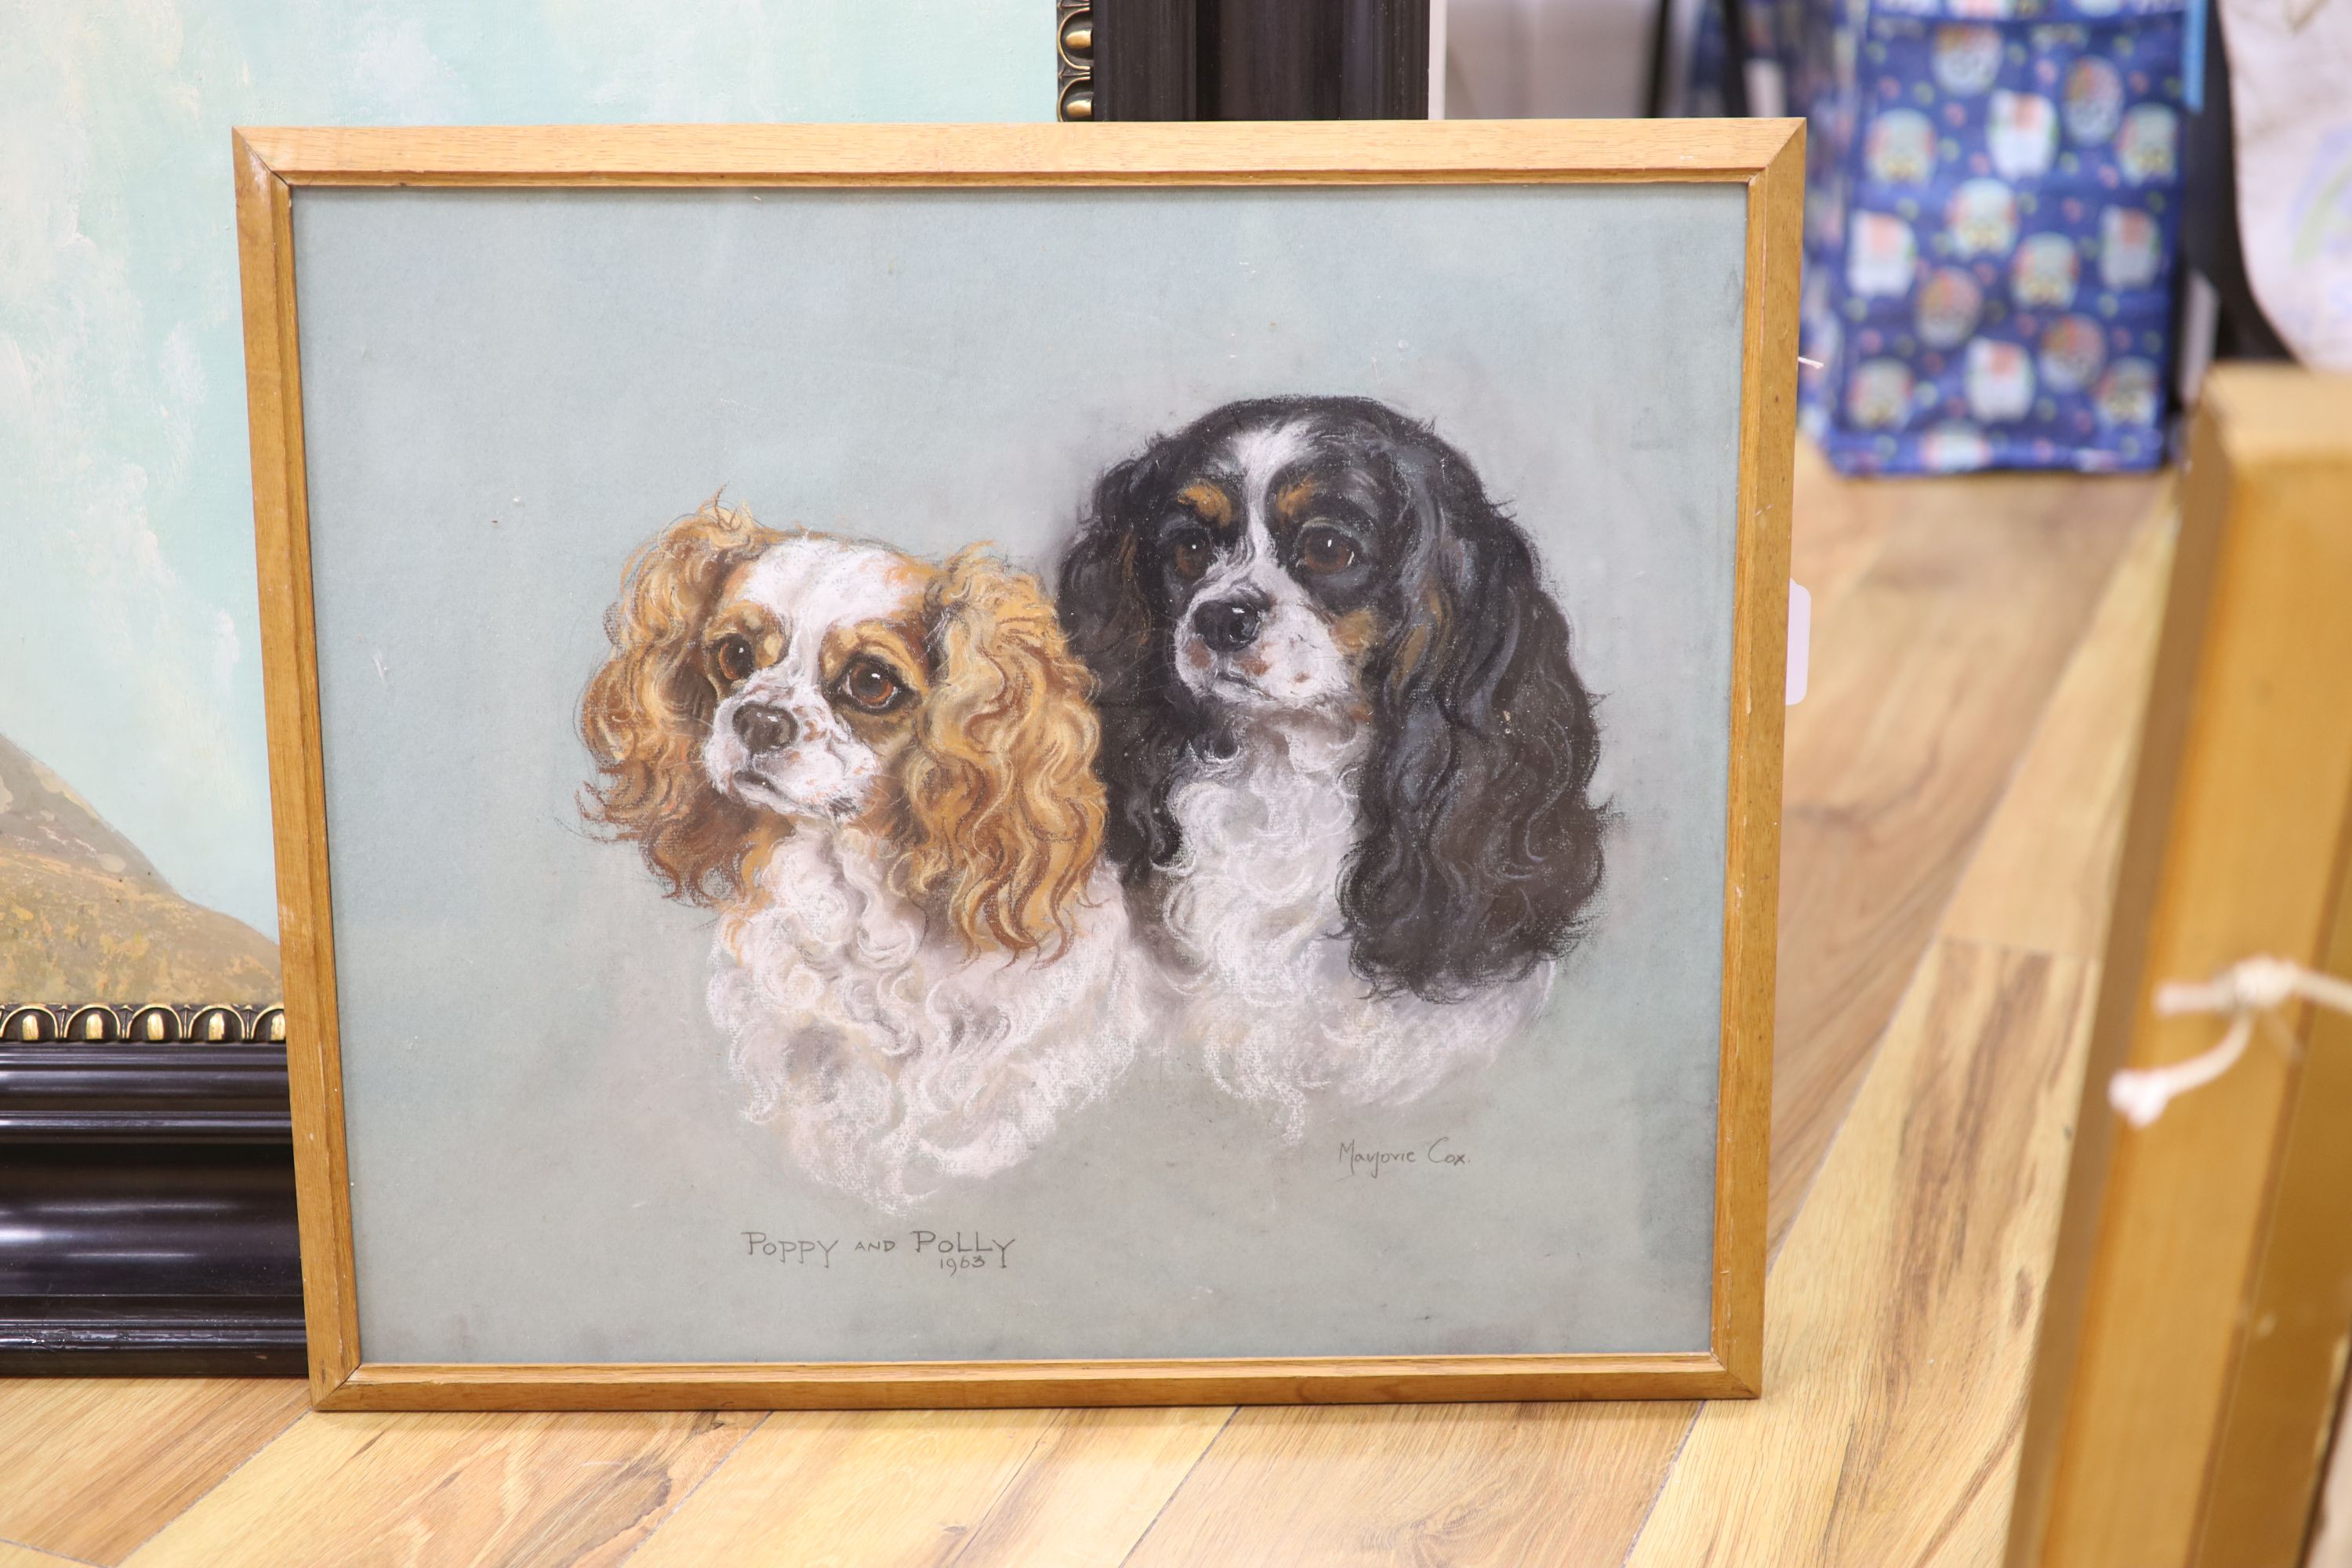 Marjorie Cox (British, 1915-2003) ‘Poppy & Polly’, Study of two Cavalier King Charles Spaniels, signed and dated 1963, Castle on paper, framed and glazed, 43 x 50cm.